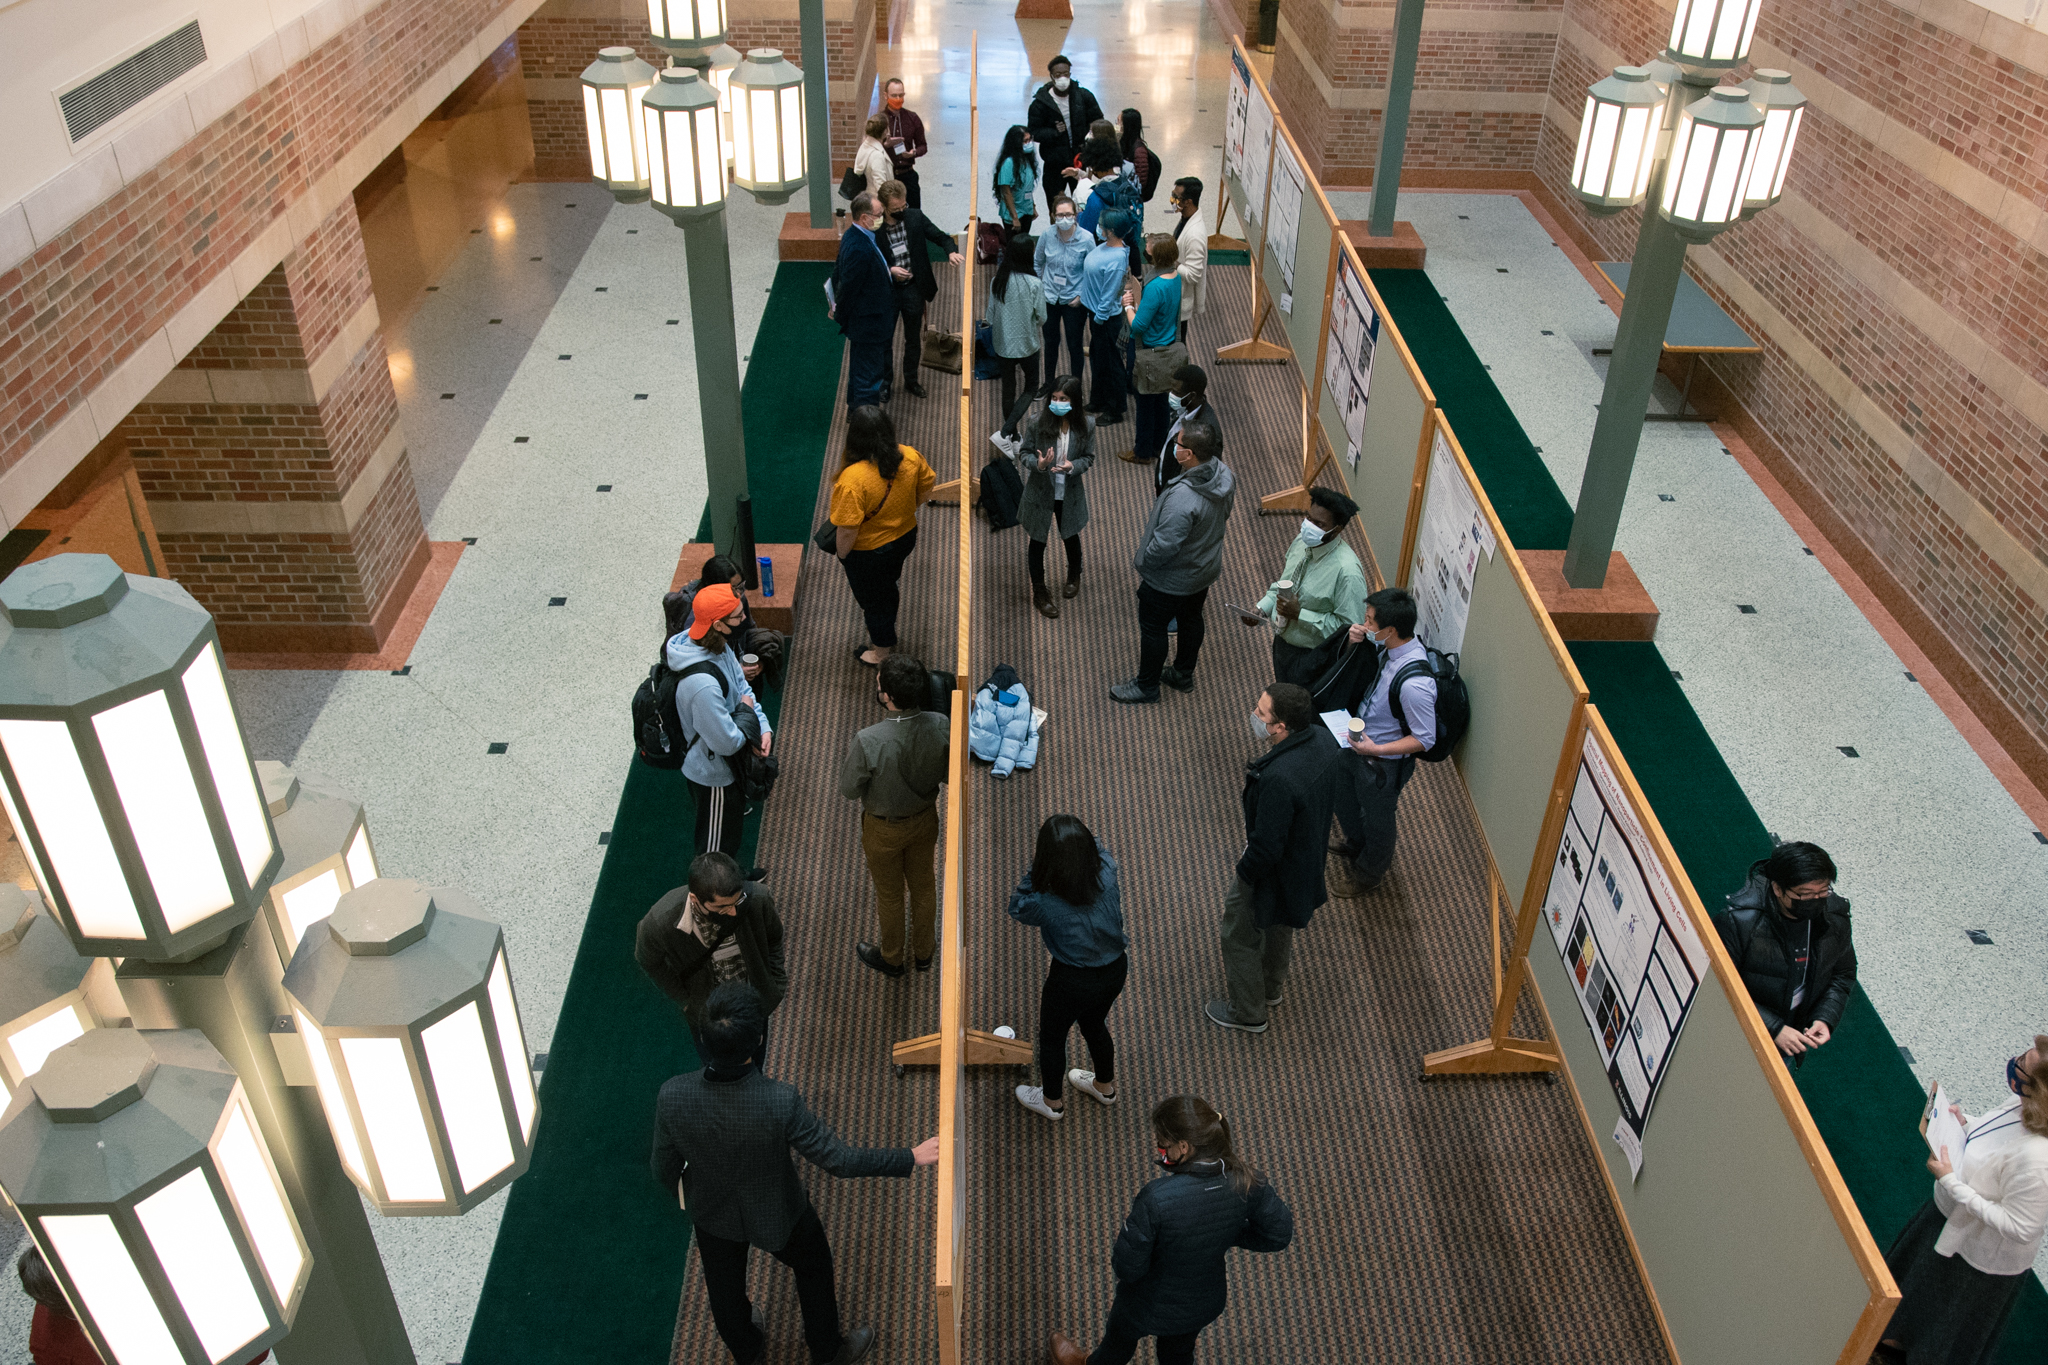 Wide shot of a graduate student poster session - students standing around looking at posters.